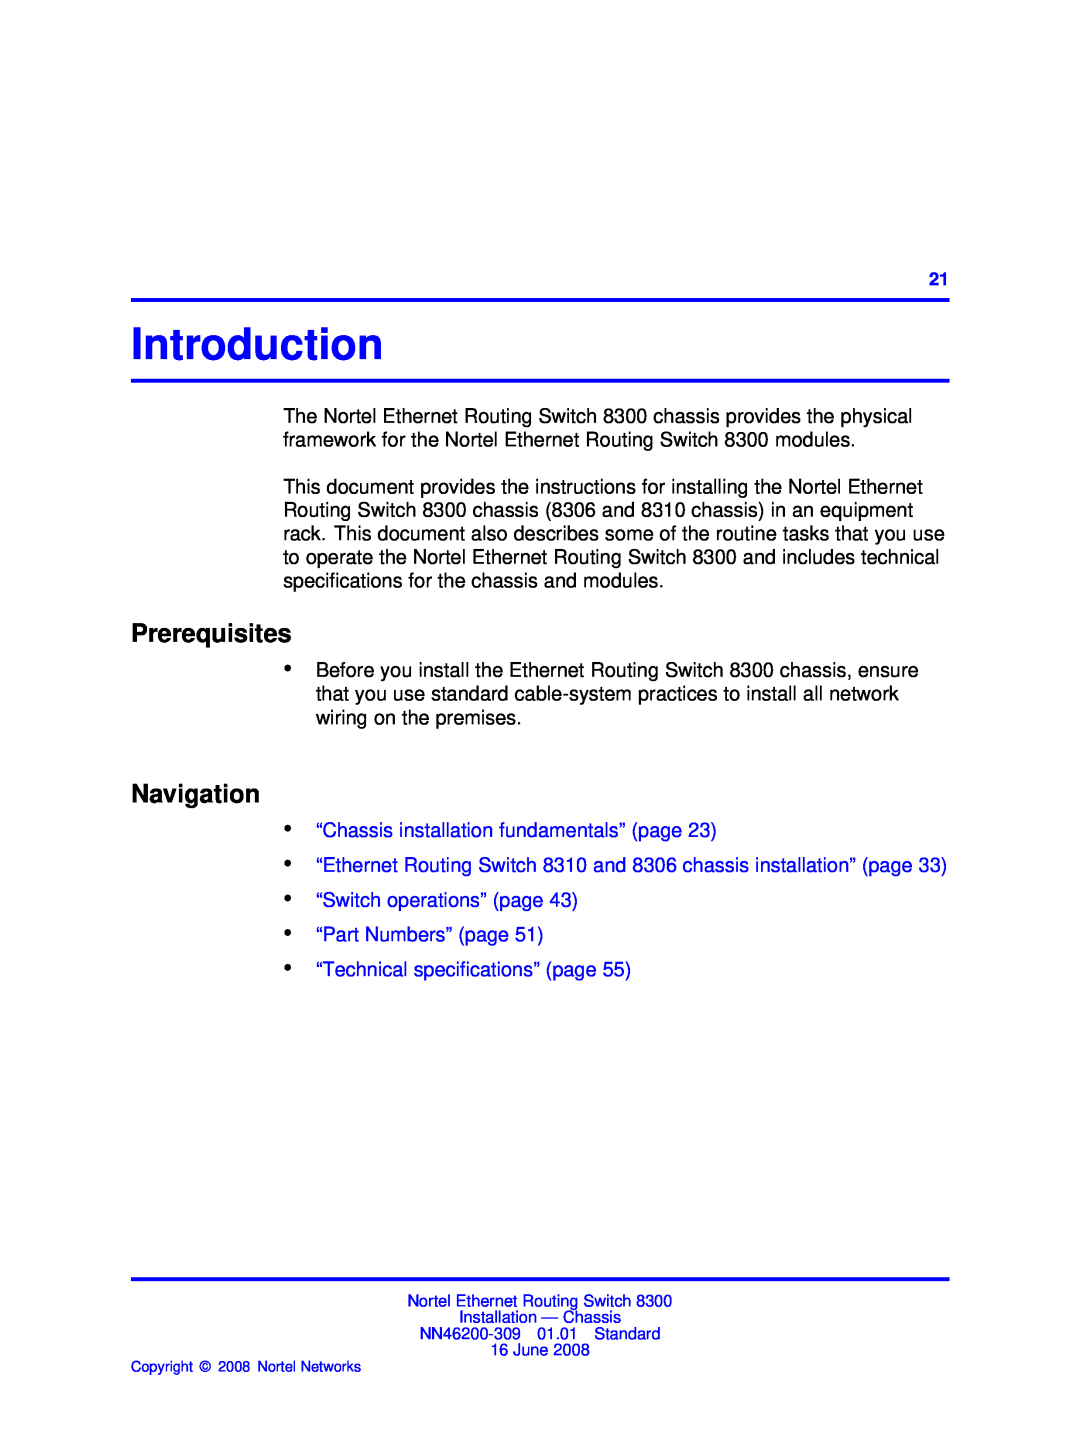 Nortel Networks 8306, 8310 manual Introduction, Prerequisites, Navigation, “Chassis installation fundamentals” page 